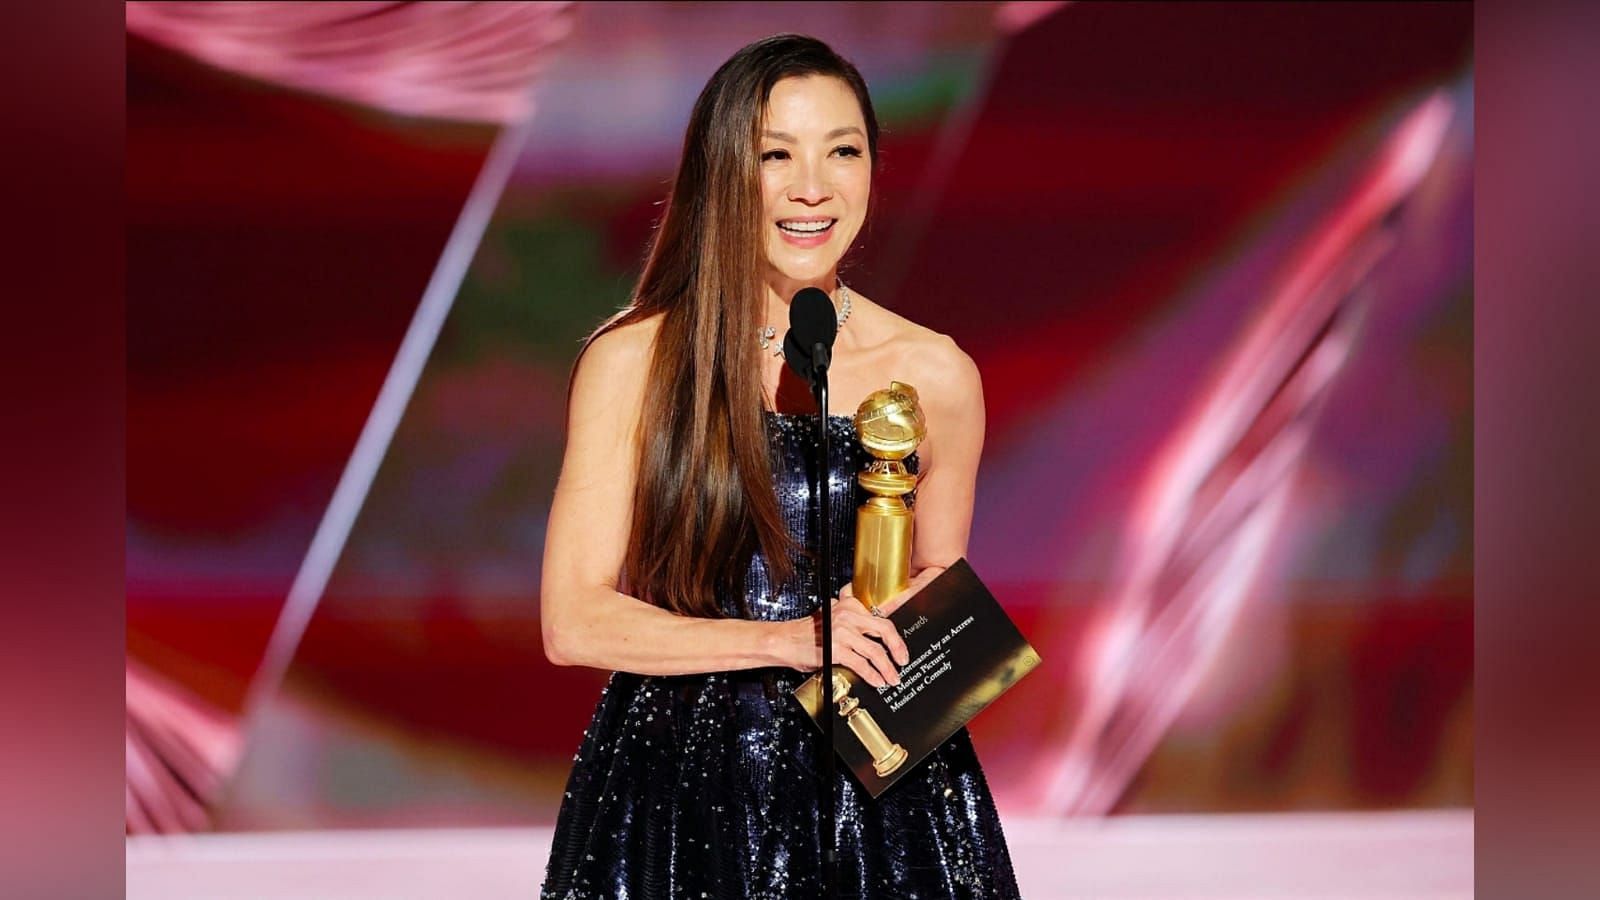 Michelle Yeoh received her first Golden Globe award for her role in Everything Everywhere All at Once (Image via Twitter/@richardker)